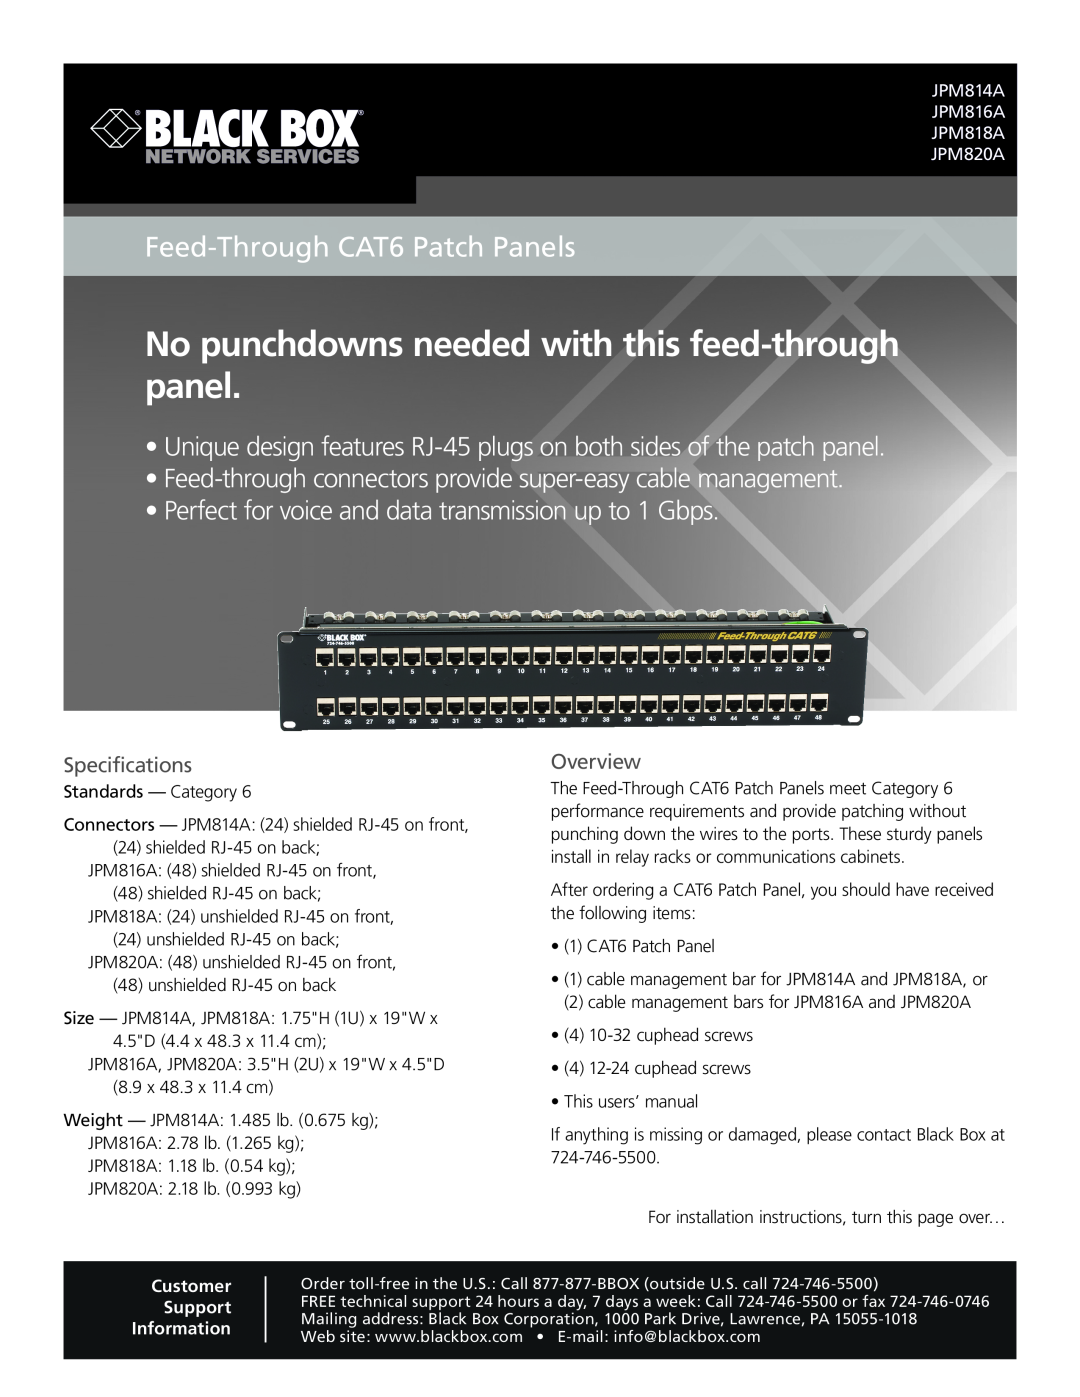 Black Box JPM814A, JPM816A specifications No punchdowns needed with this feed-throughpanel, Feed-ThroughCAT6 Patch Panels 